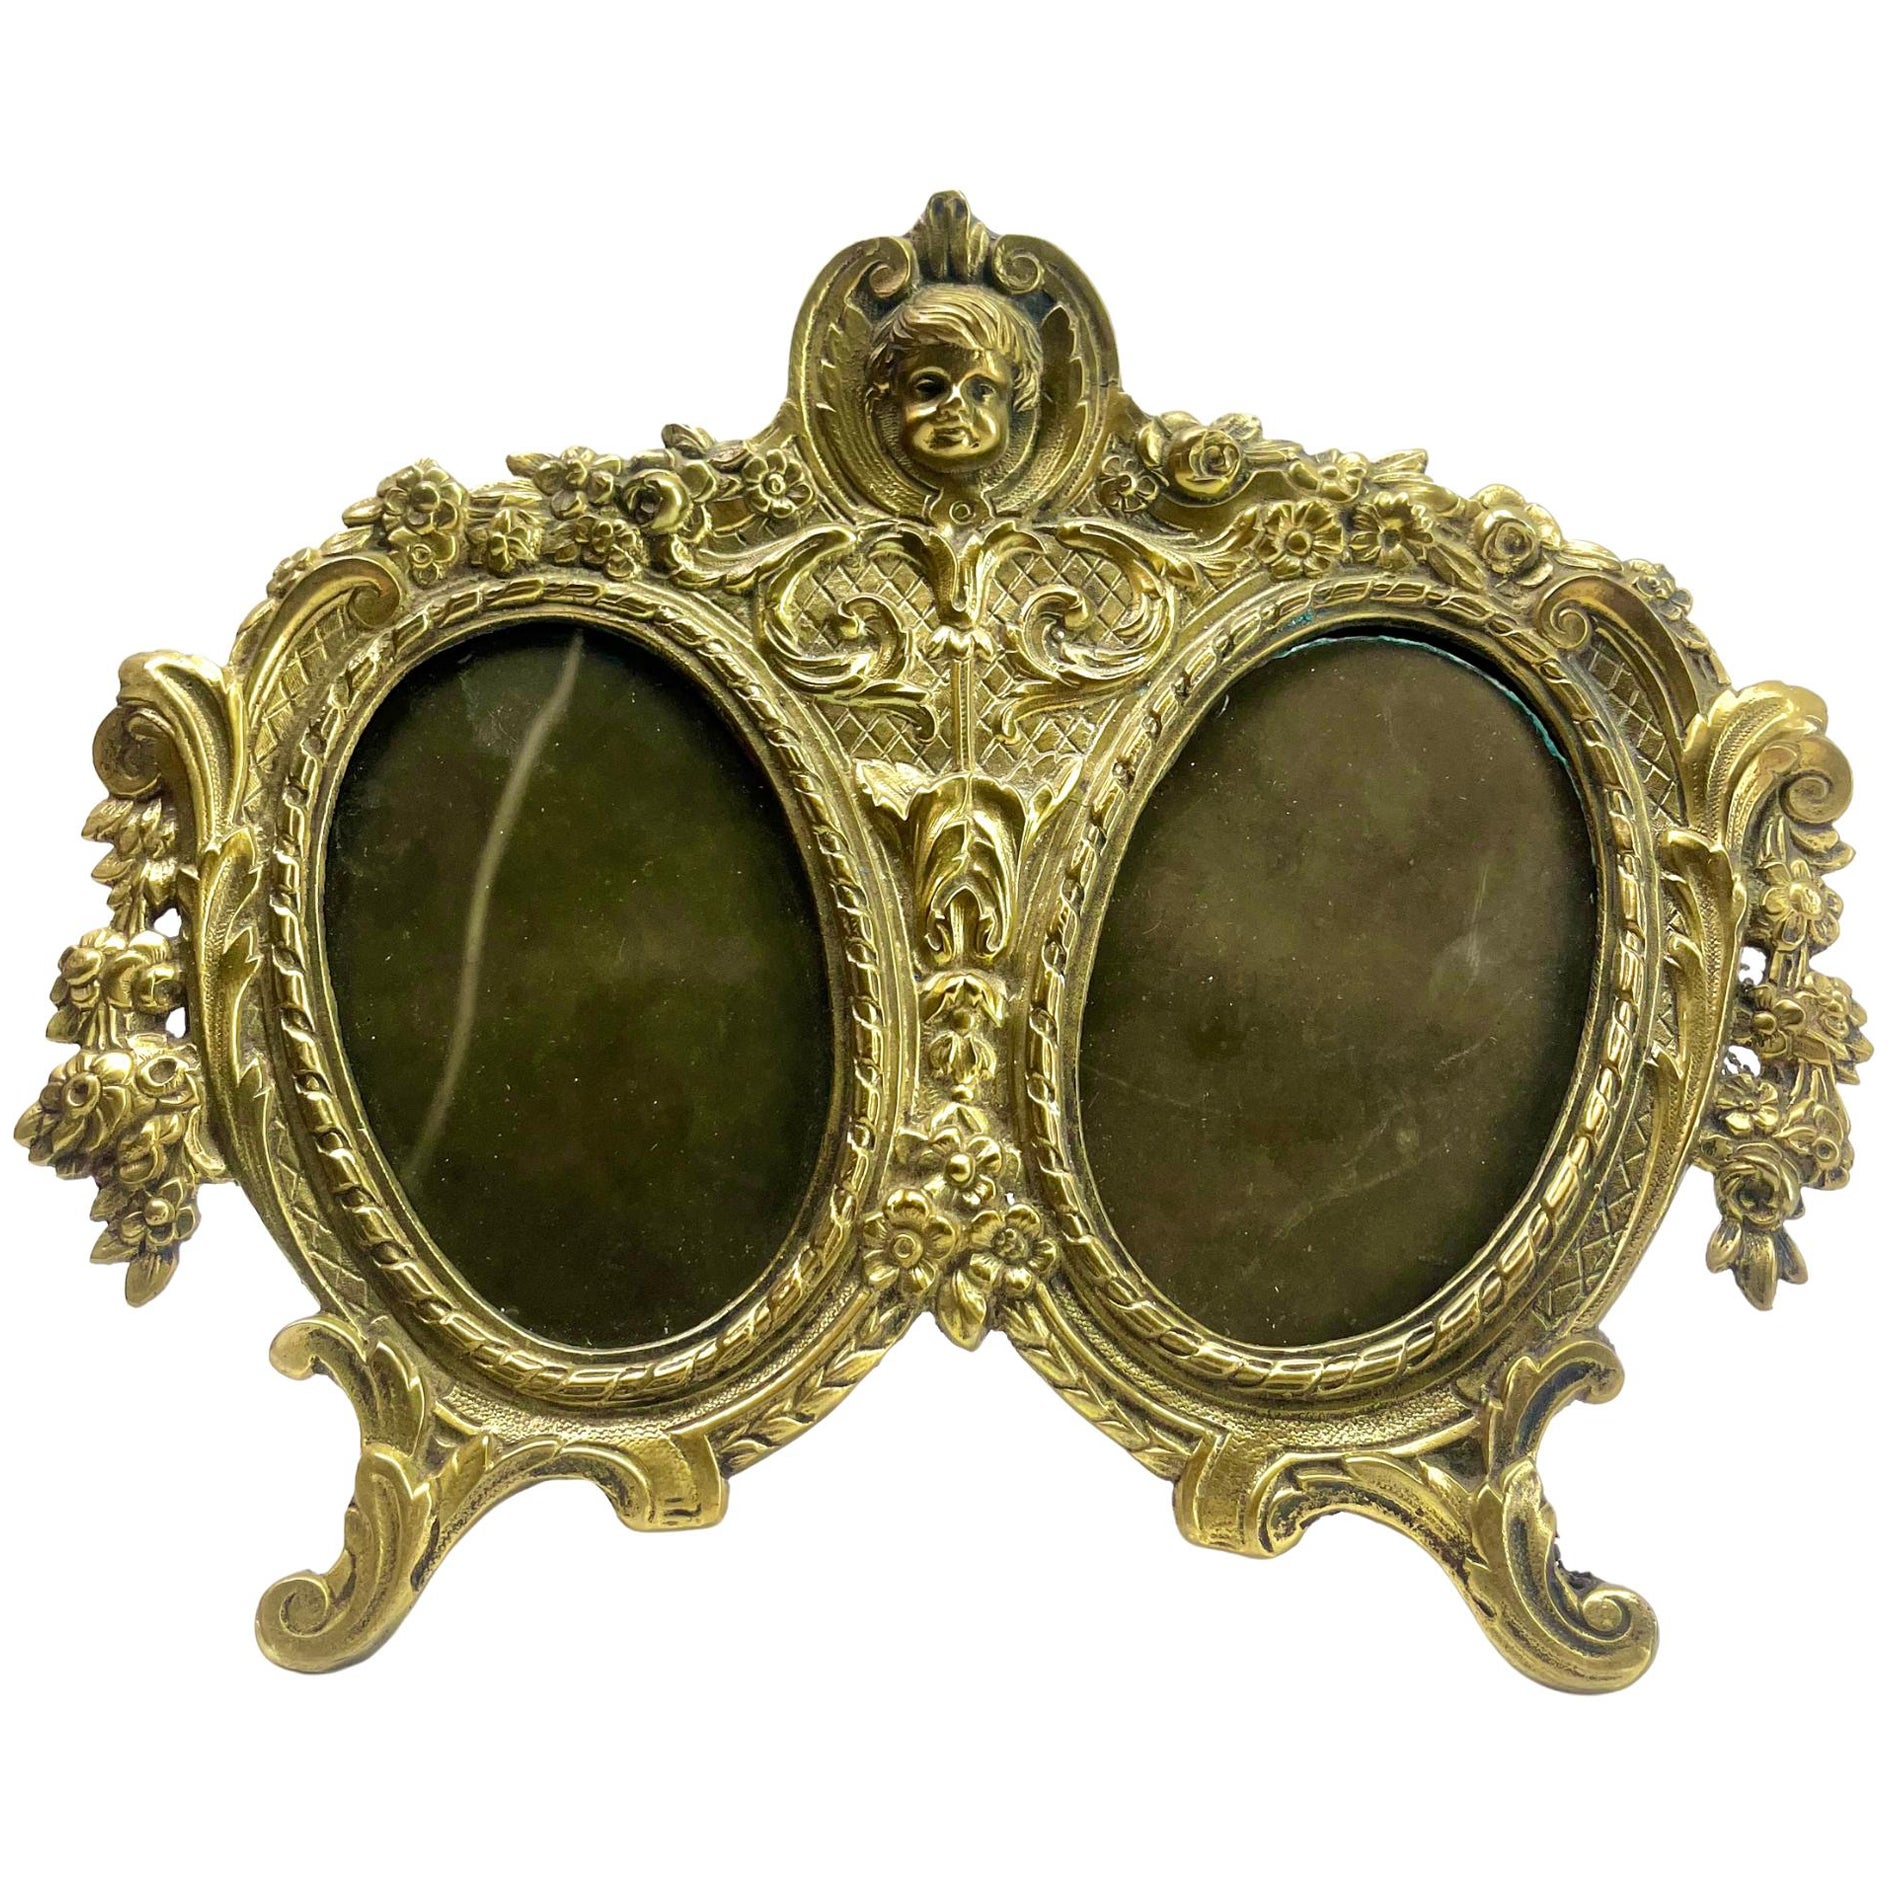 'Lover's Knot' Double Picture Frame, Polished Brass in The Style of J.H. France 